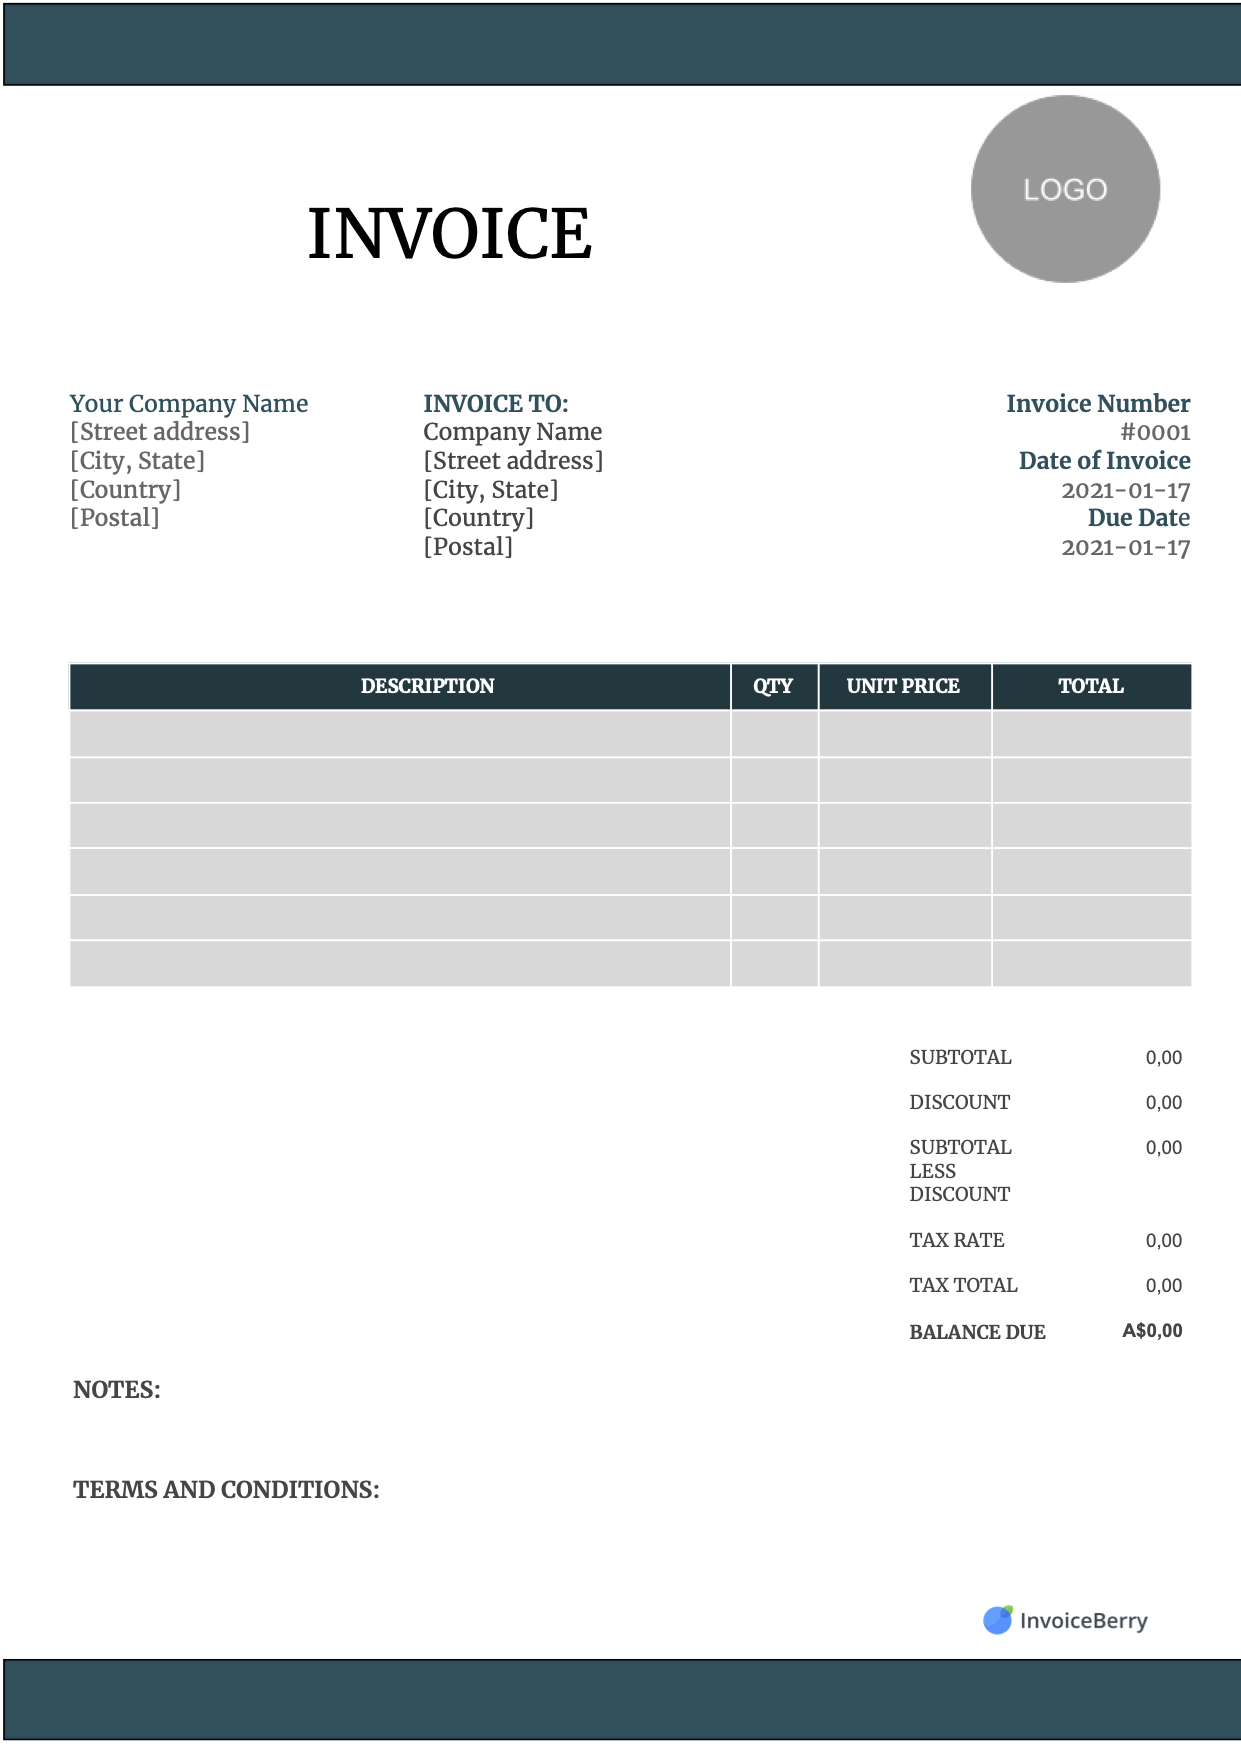 Free Google Drive Invoice Templates: Blank Docs & Sheets Invoices Pertaining To Image Of Invoice Template